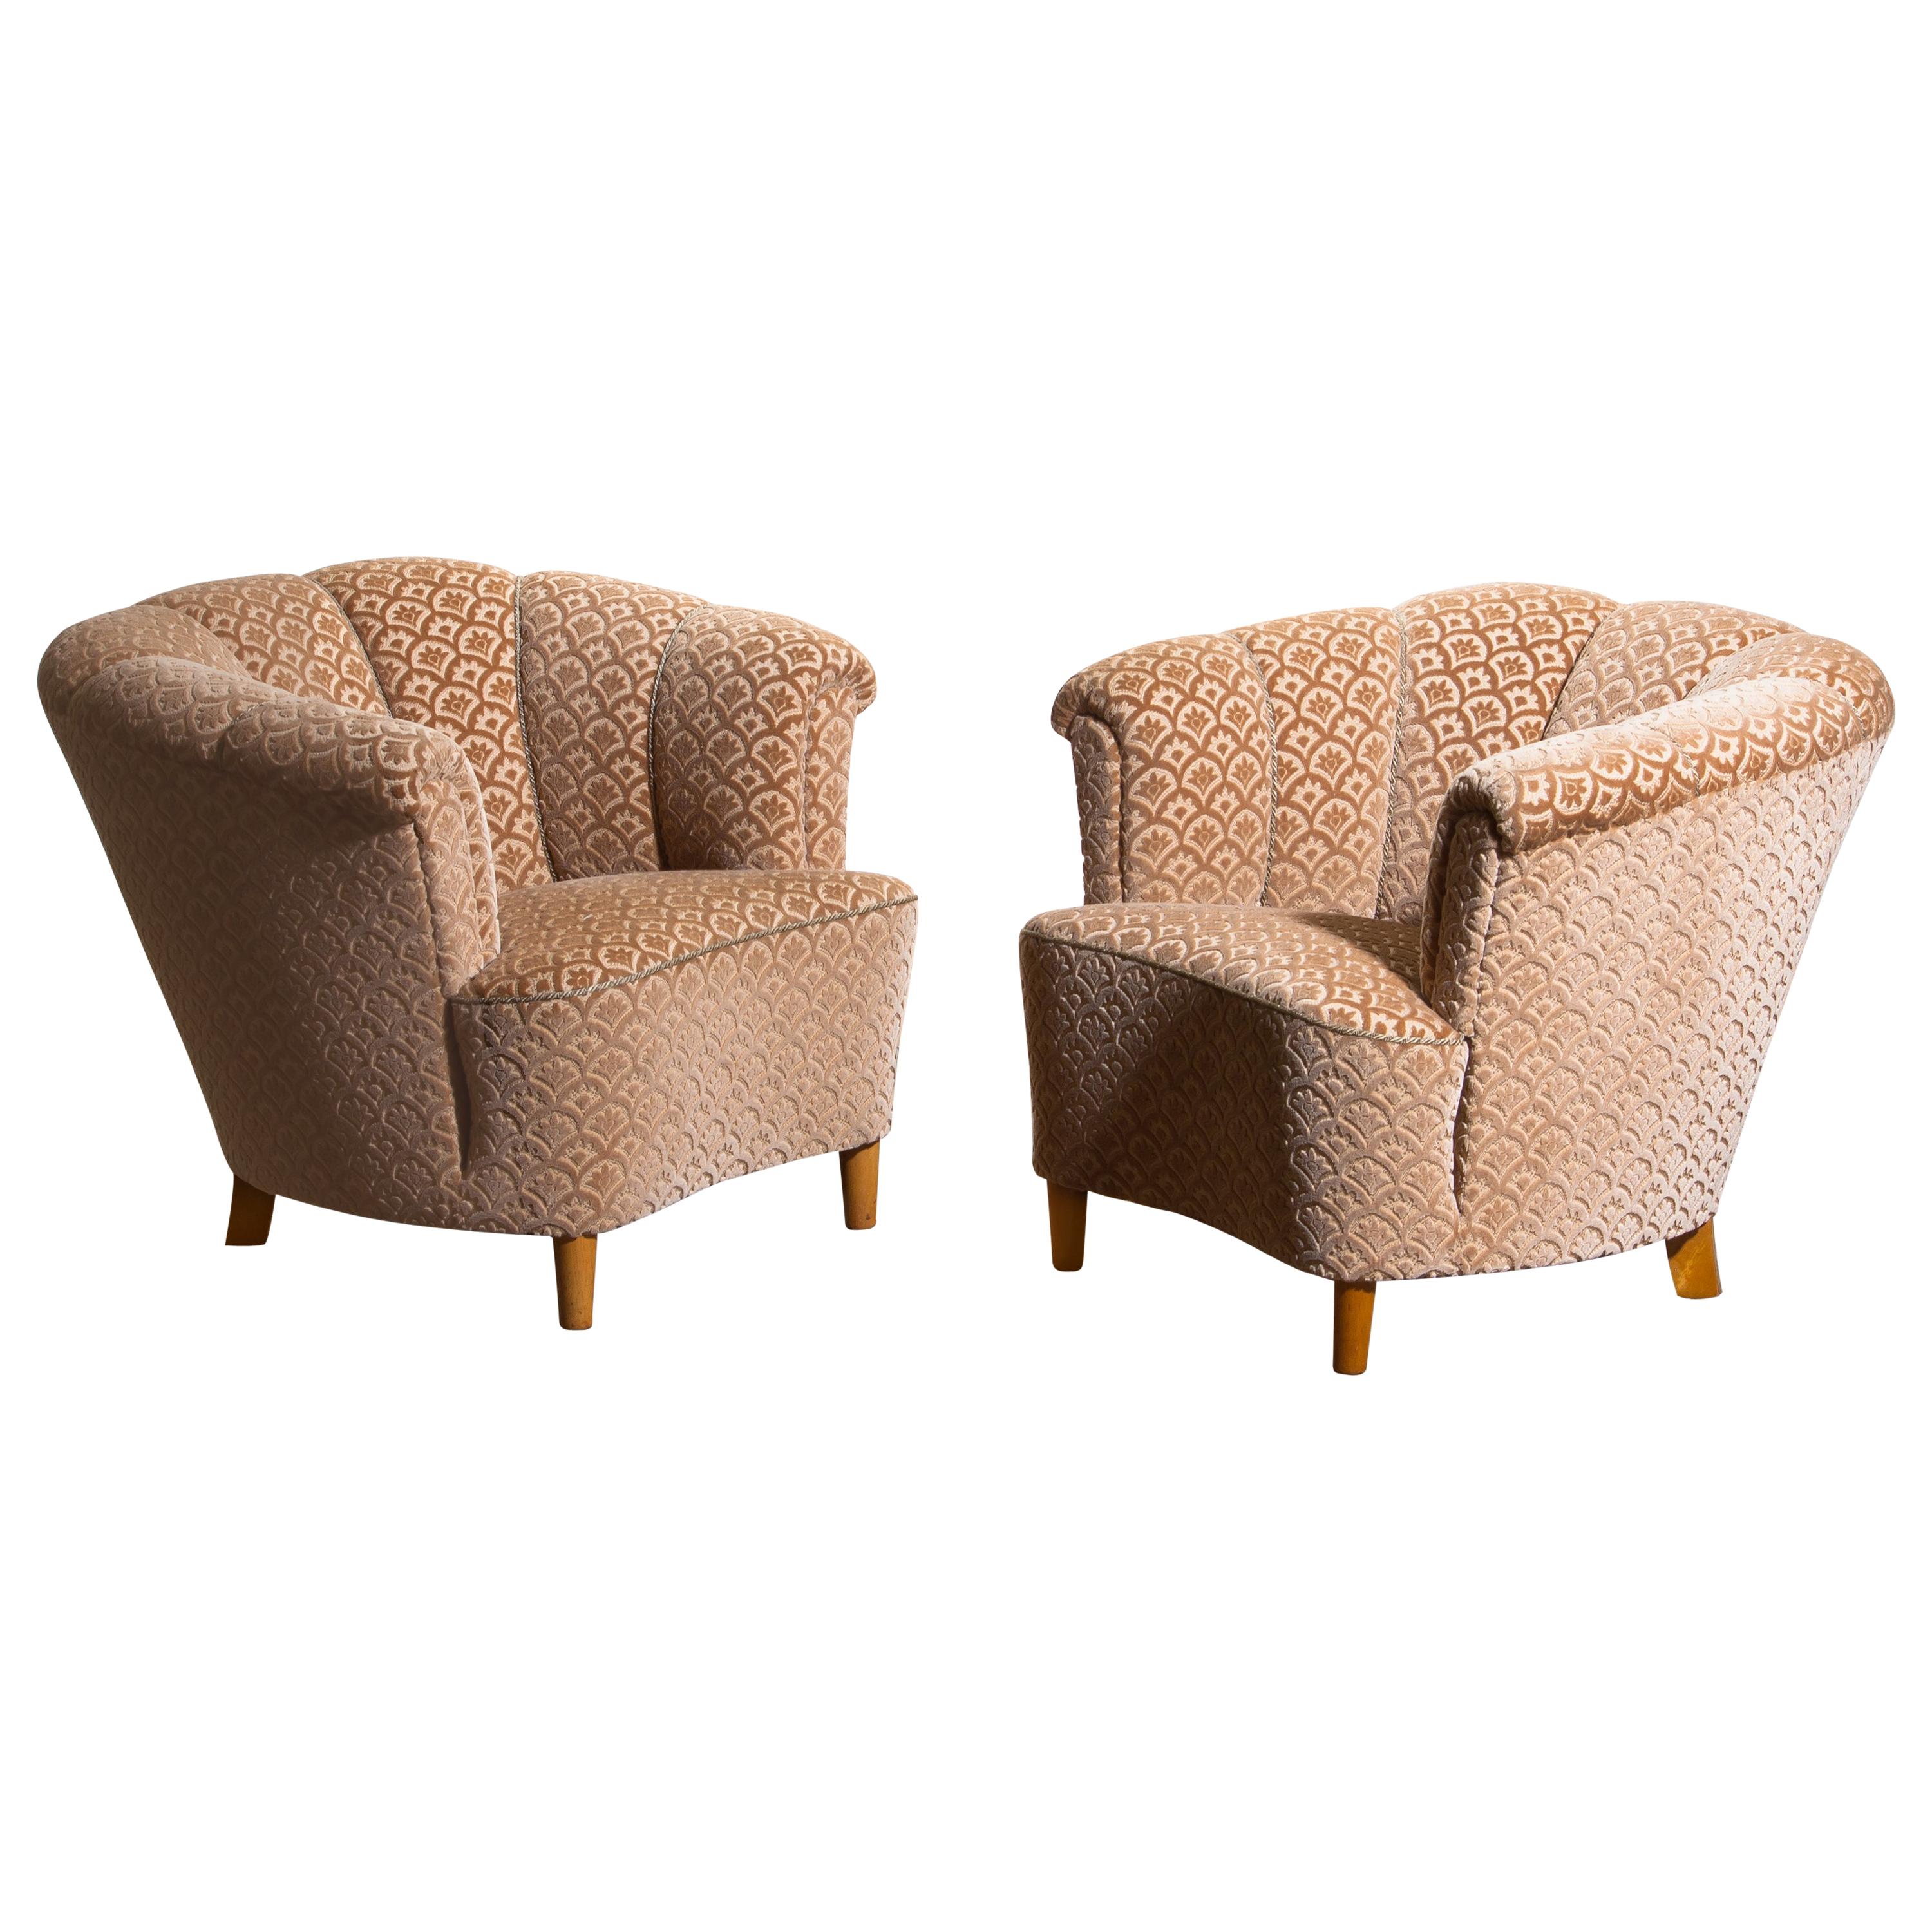 Beautiful set of two comfortable easy or cocktail chairs from the 1940s.
Both chairs are in original and excellent condition.
The chairs are richly upholstered in flocked velvet and standing on beech legs.
 